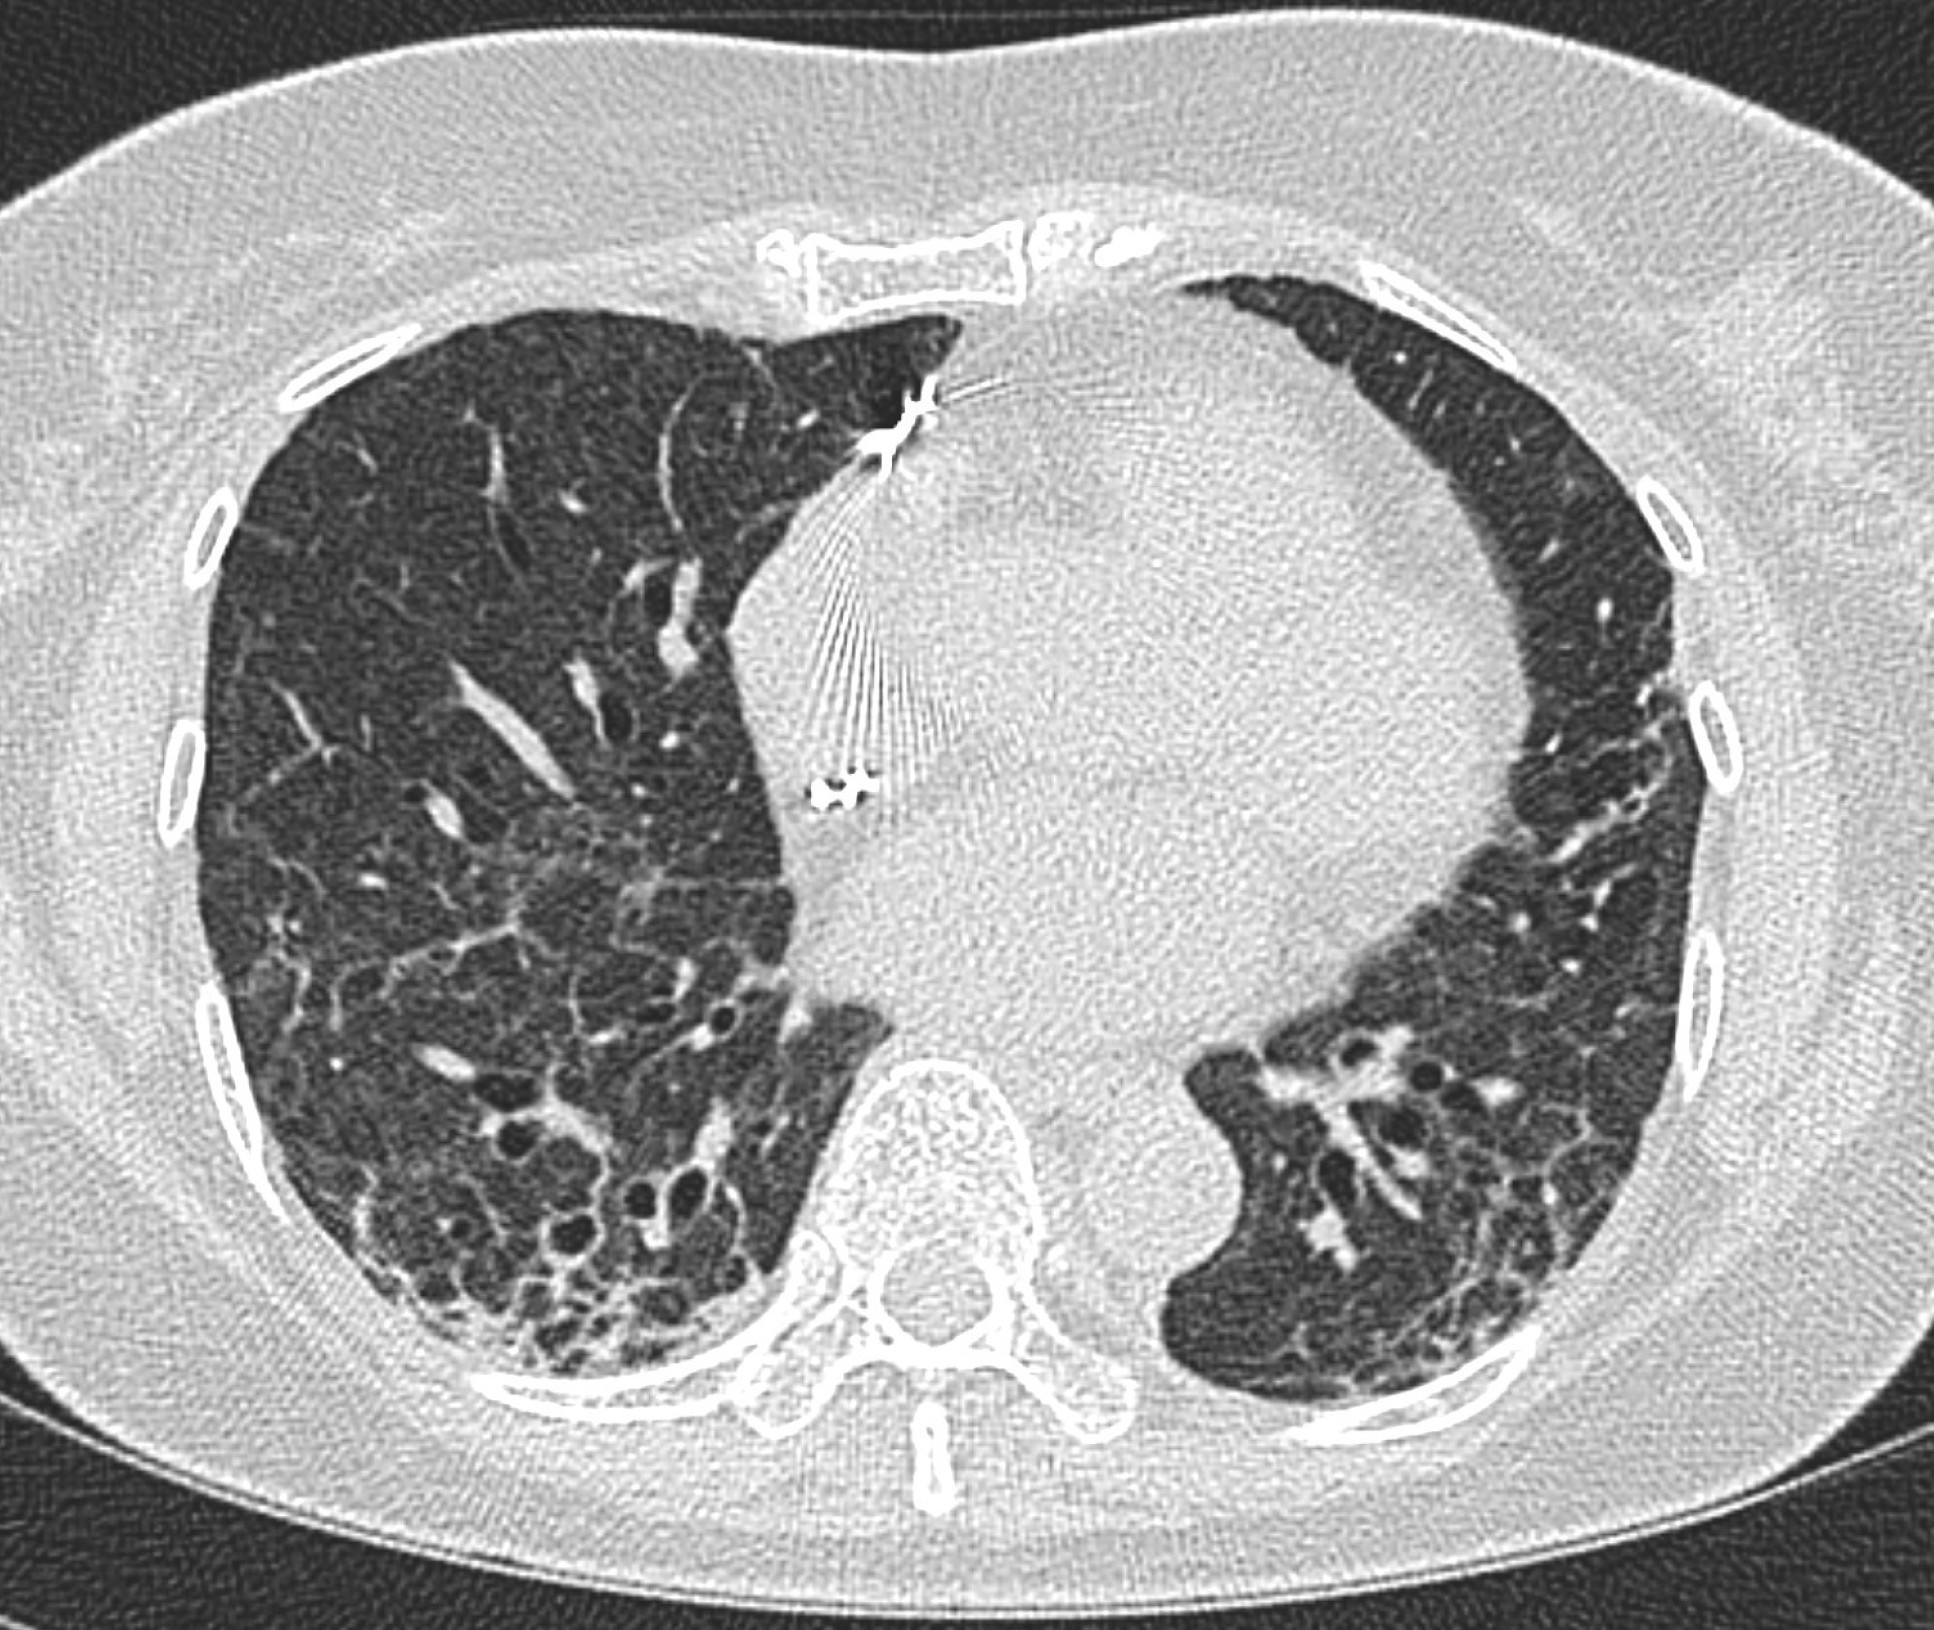 A lung scan of a patient following COVID-19 infection